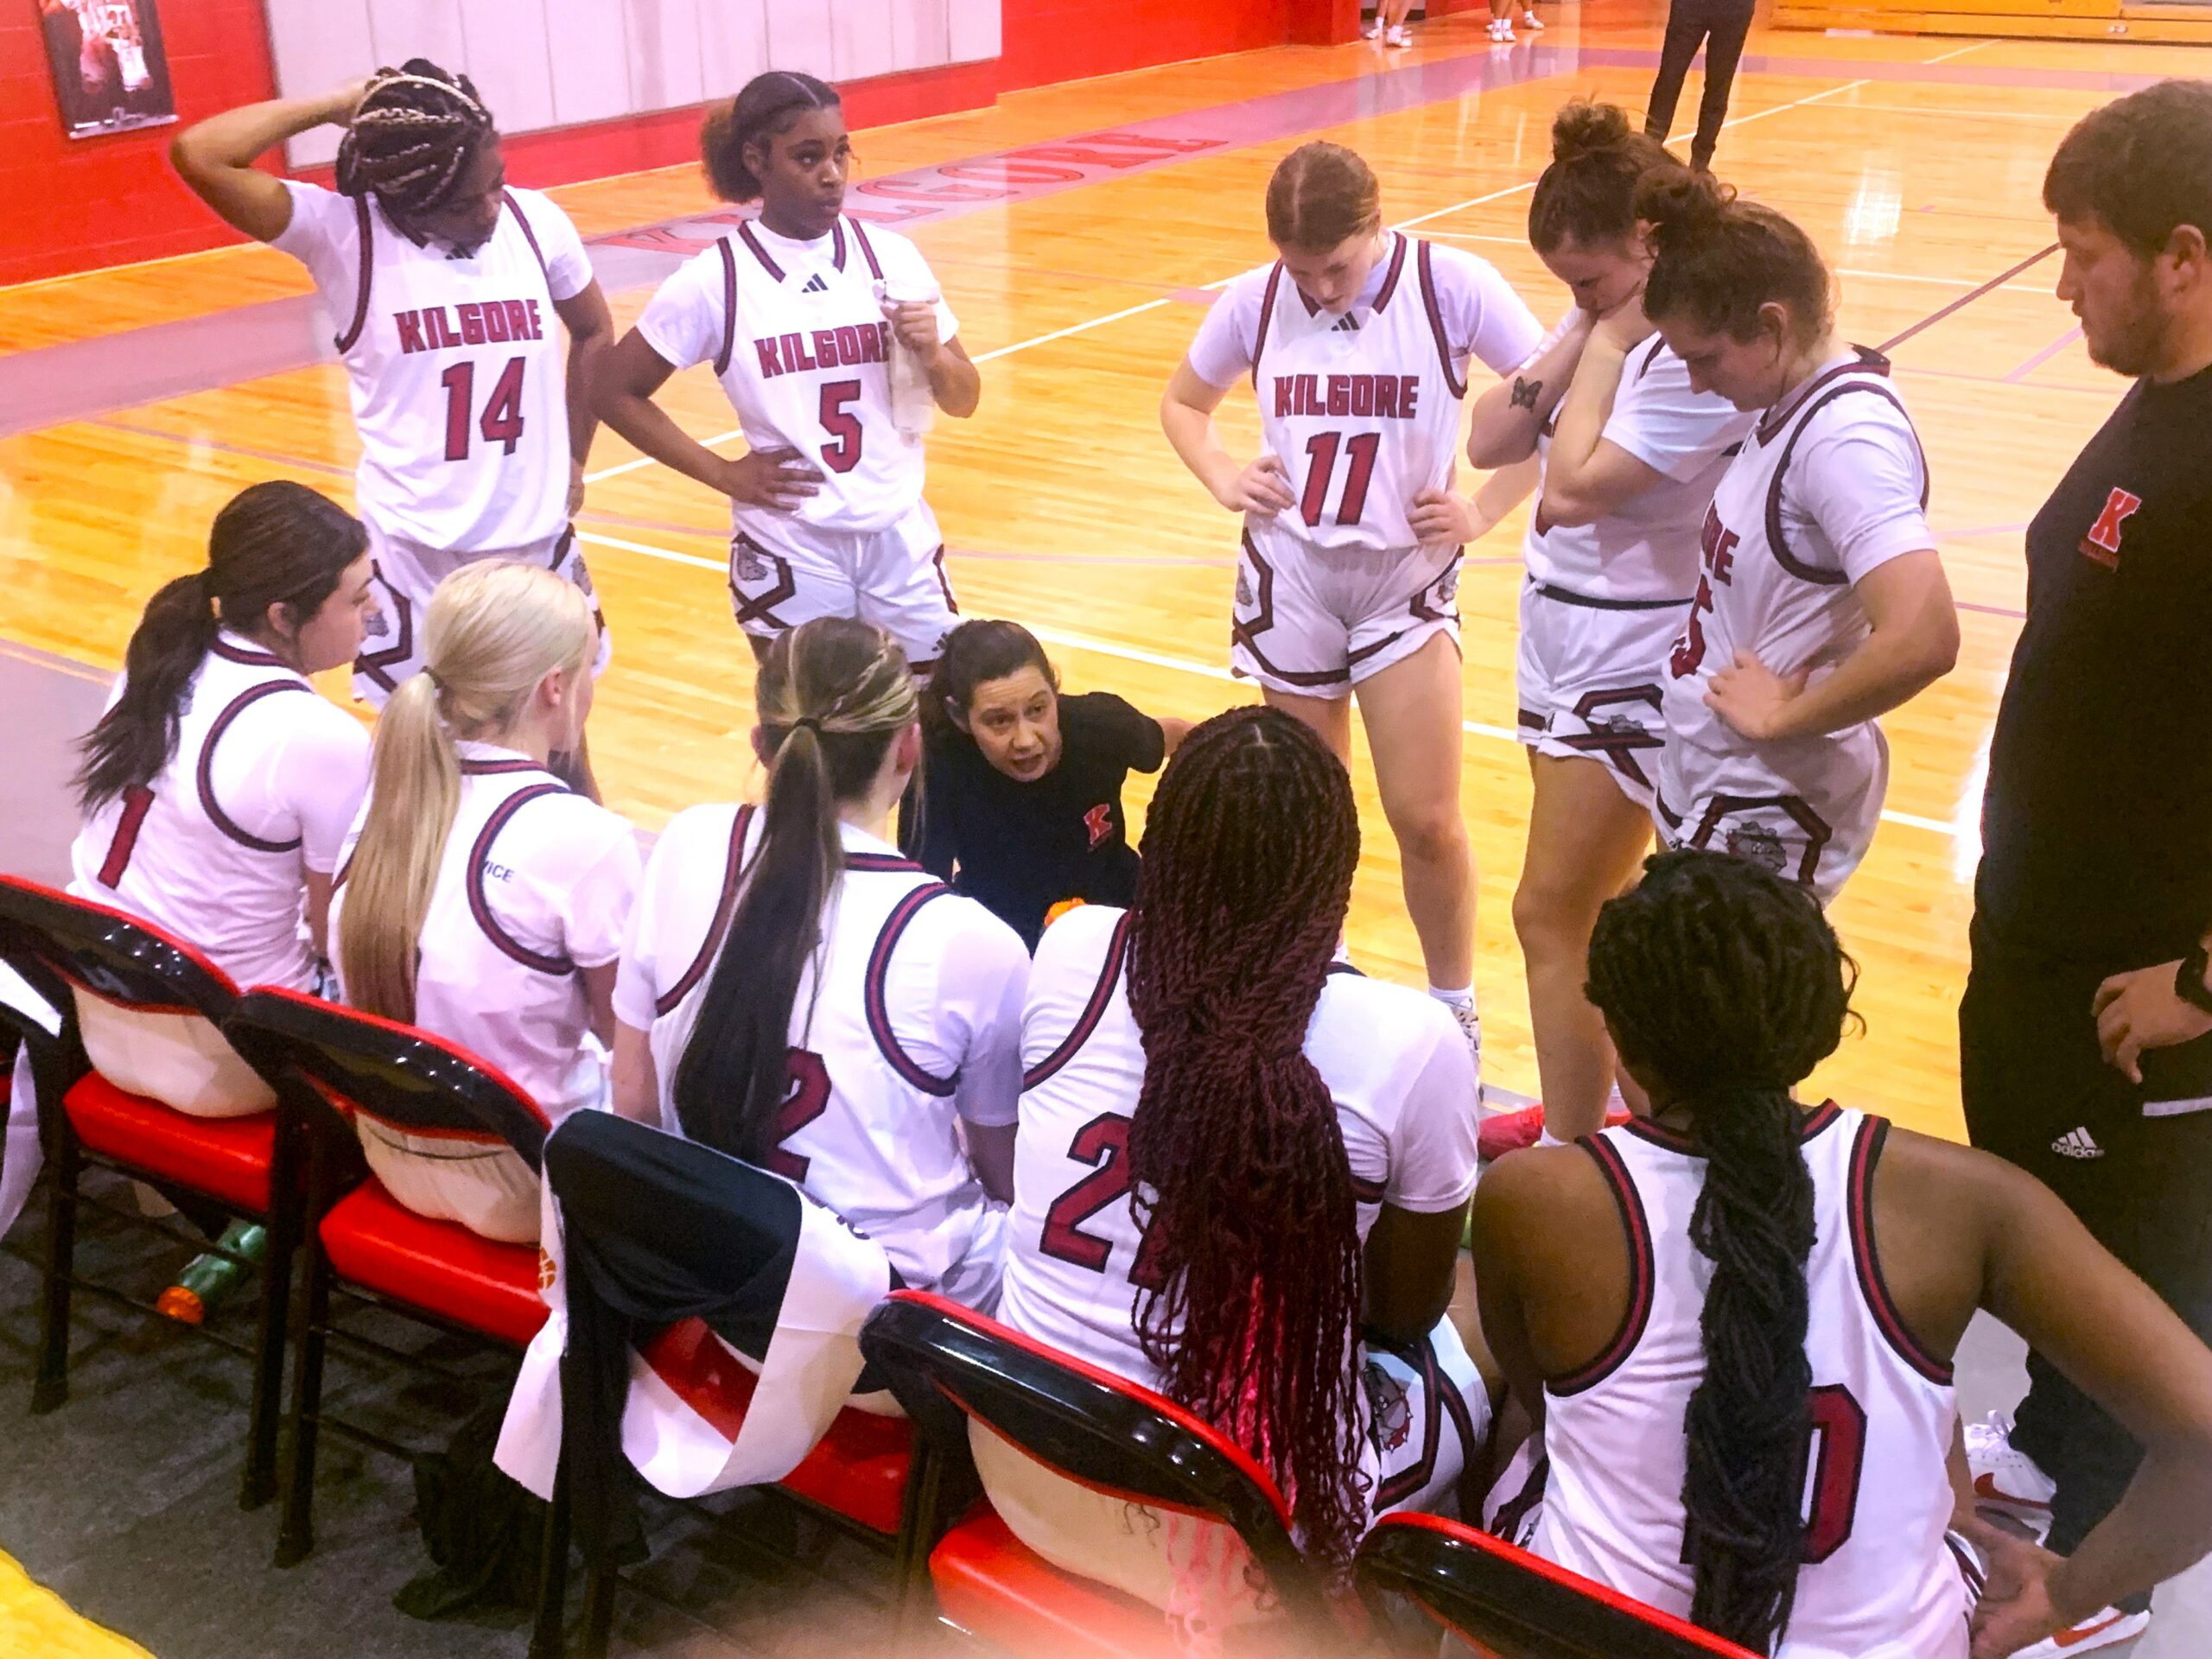 KHS SPLITS WITH CARTHAGE | Lady ‘Dogs lose, ‘Dogs win